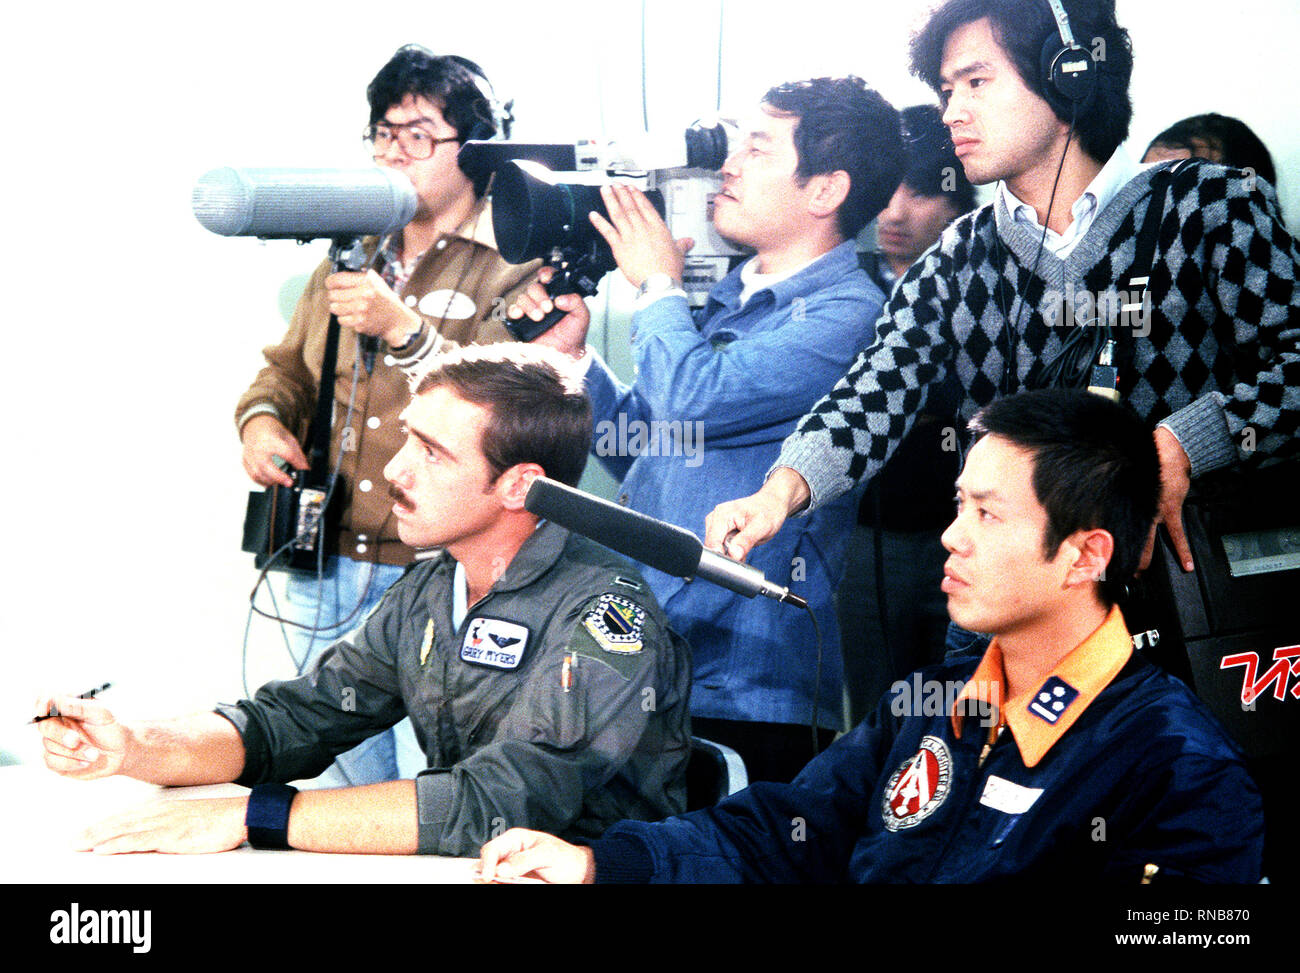 A Japanese national television crew documents the briefing of U.S. Air Force and Japanese Air Self Defense Force pilots during exercise Cope North '80.  A U.S. Air Force F-4E Phantom II aircraft pilot assigned to the 3rd Tactical Fighter Wing is to the left. Stock Photo